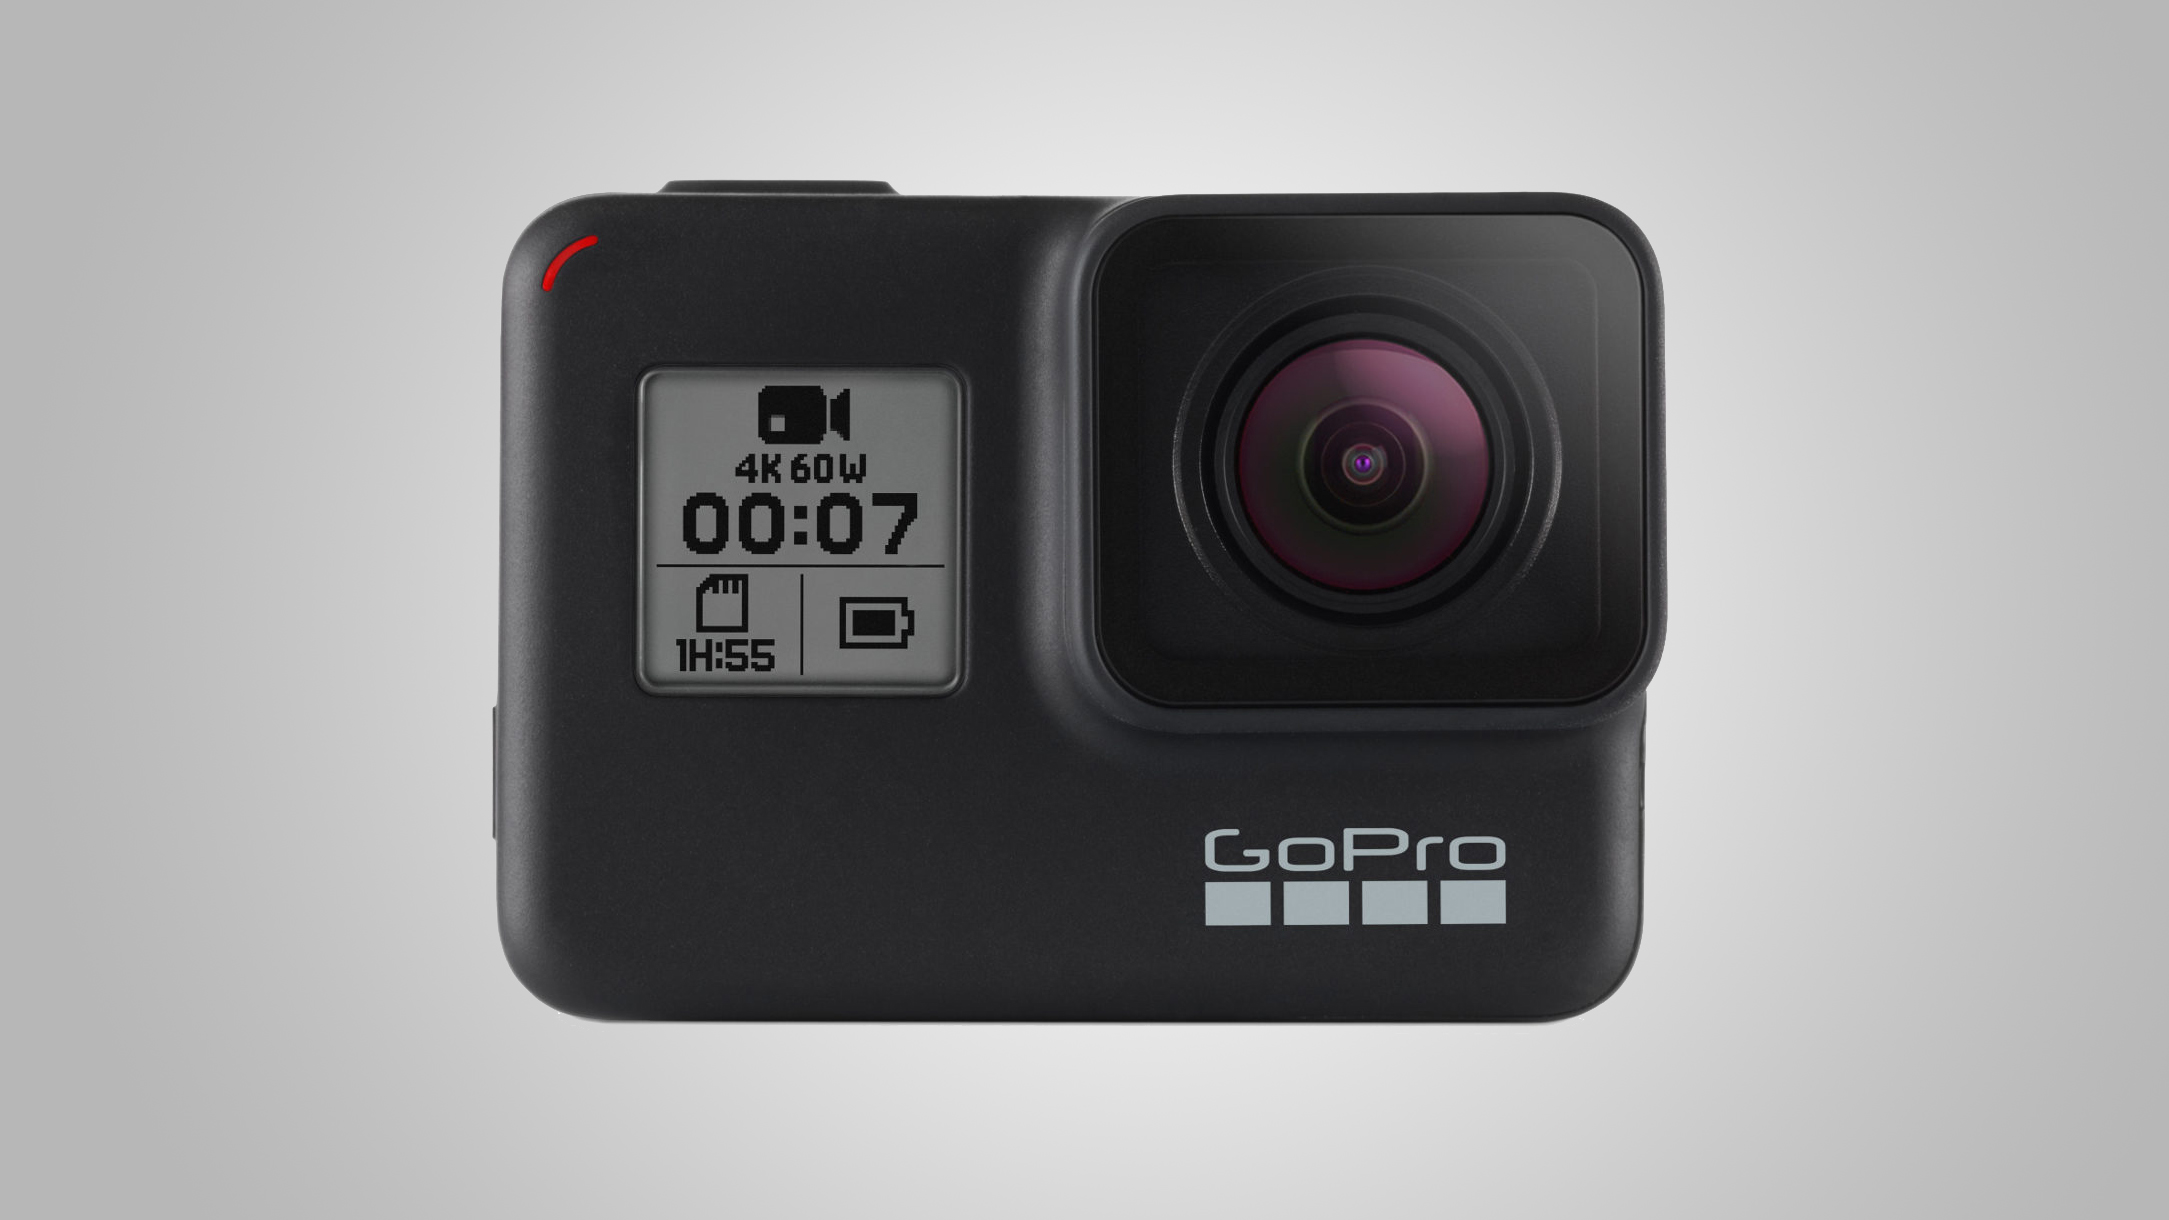 Best Action Camera 2018 10 Cameras For The Gopro Generation 2017 Top Social Media Auto 